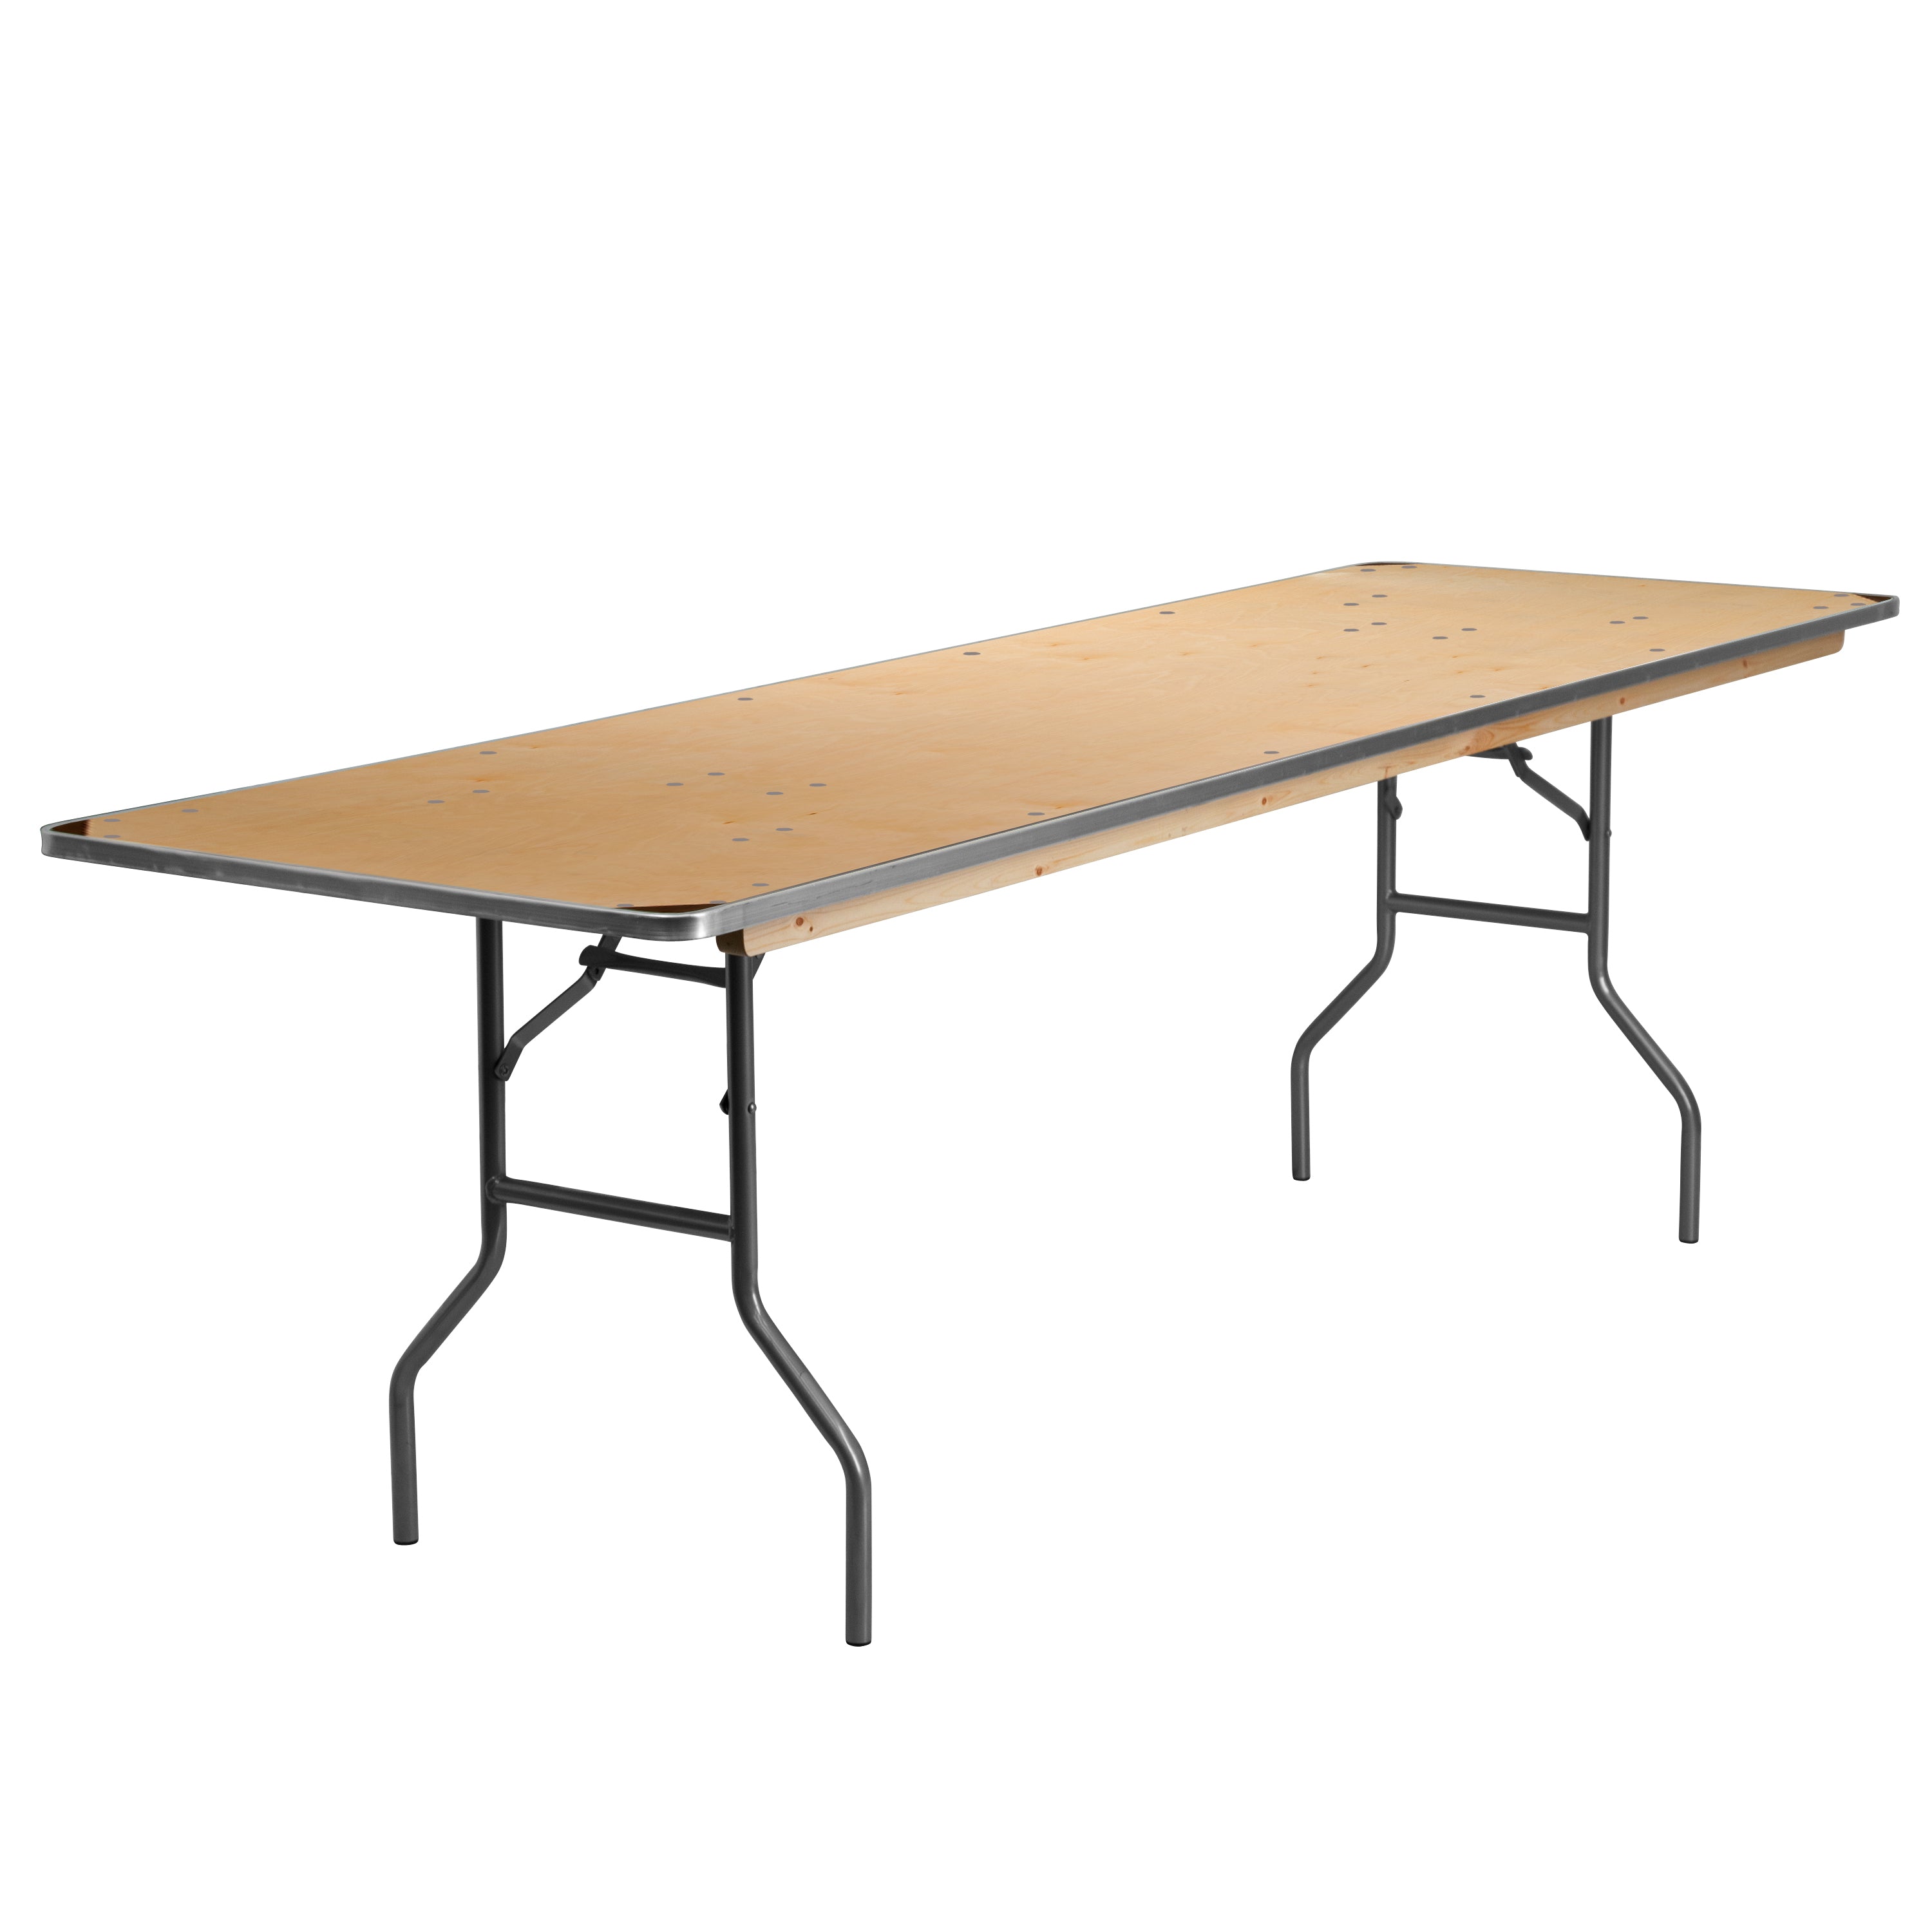 8-Foot Rectangular HEAVY DUTY Birchwood Folding Banquet Table with METAL Edges and Protective Corner Guards-Rectangular Folding Table-Flash Furniture-Wall2Wall Furnishings